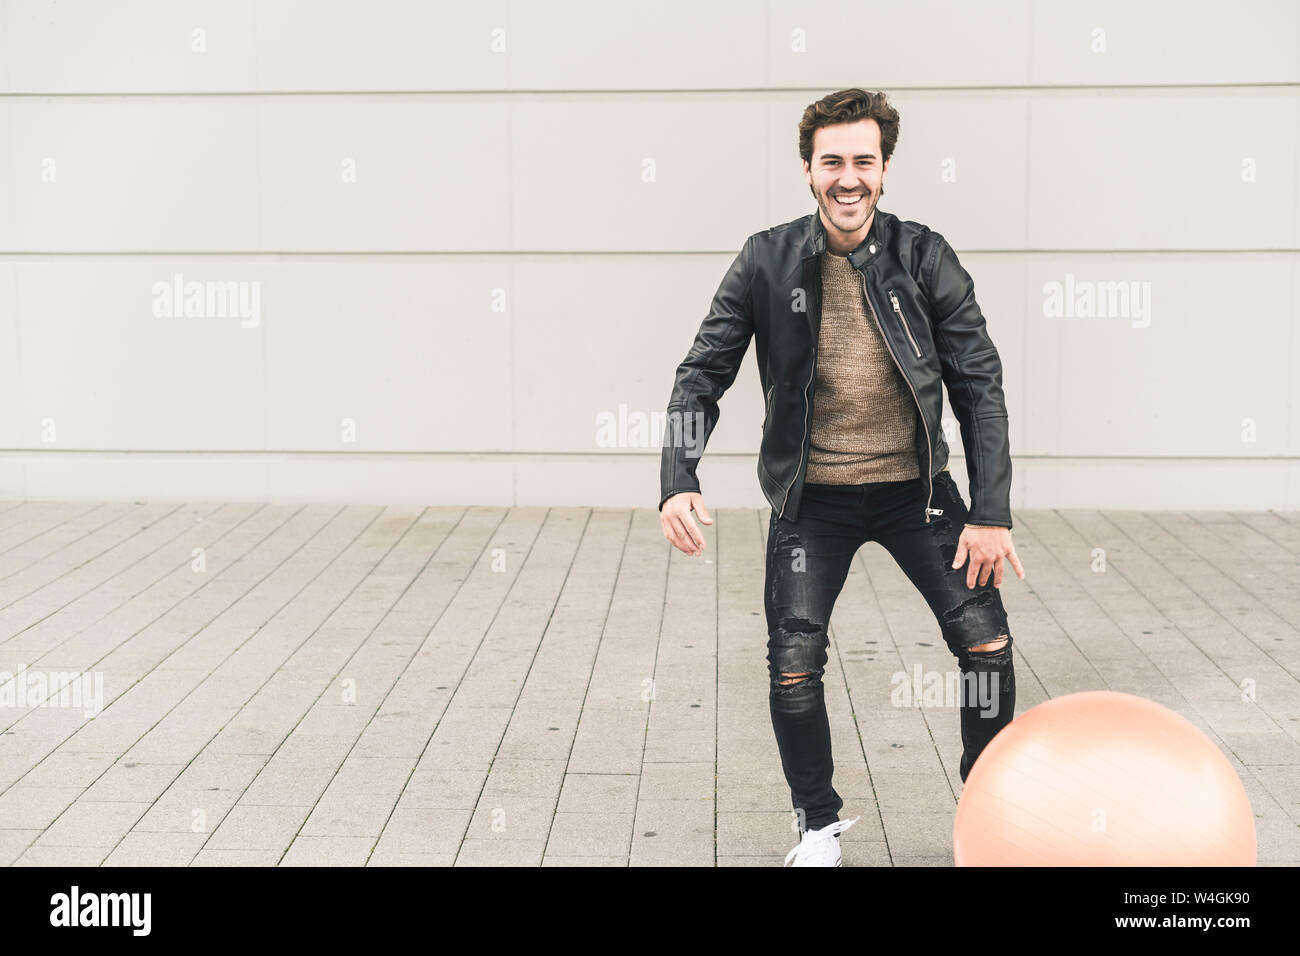 Young man in leather jacket, playing with a gym ball Stock Photo